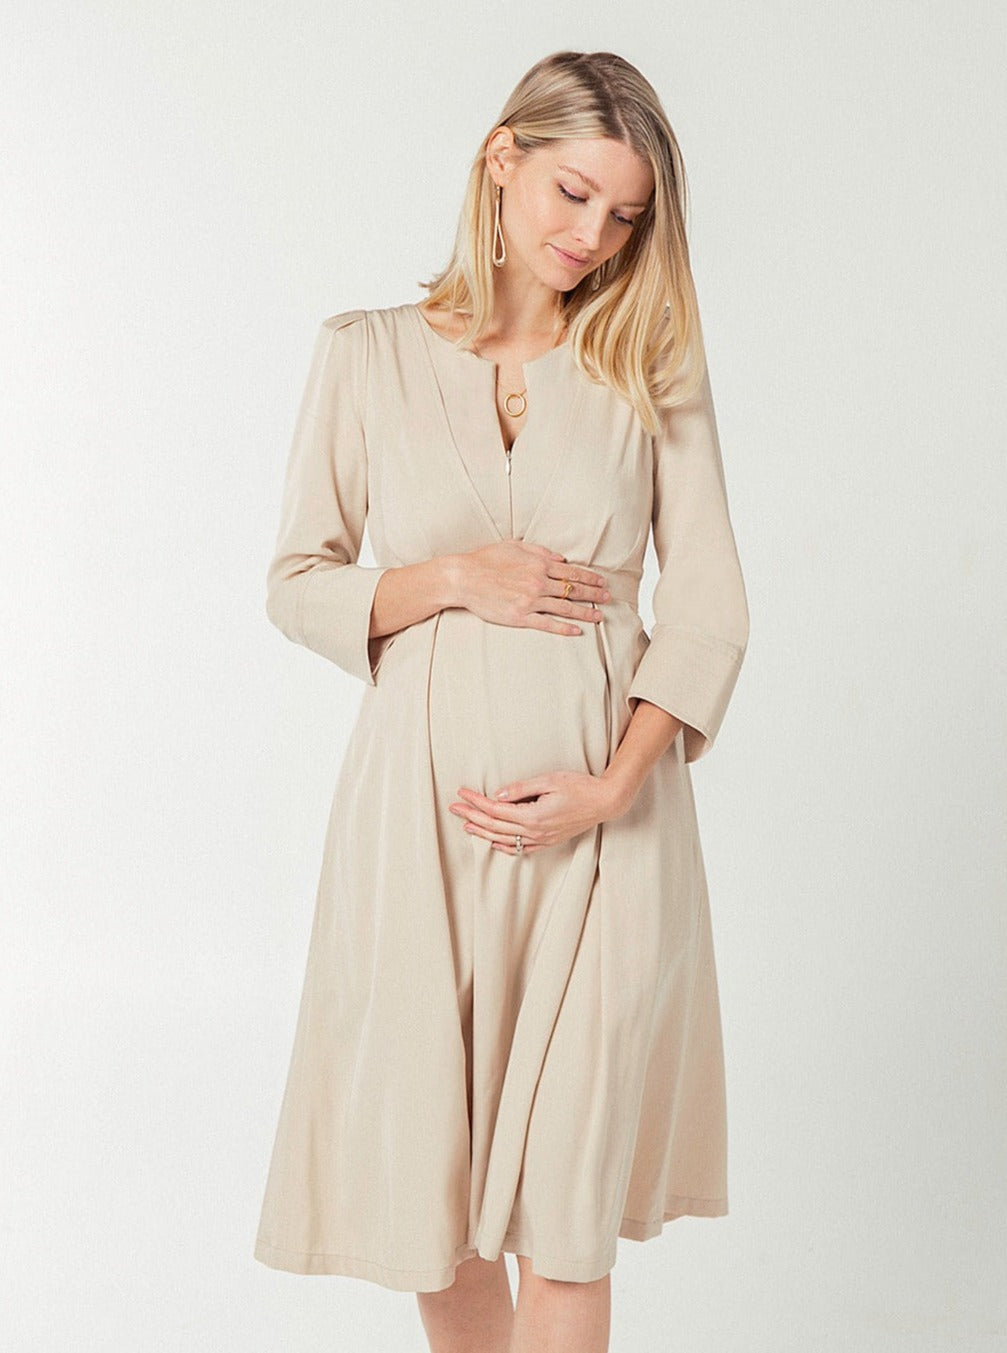 Nude maternity dress, fancy maternity & nursing dresses for work and occasion, TENCEL with empire waist, zipper breastfeeding access, and full skirt with pockets. Sustainable. Beige.